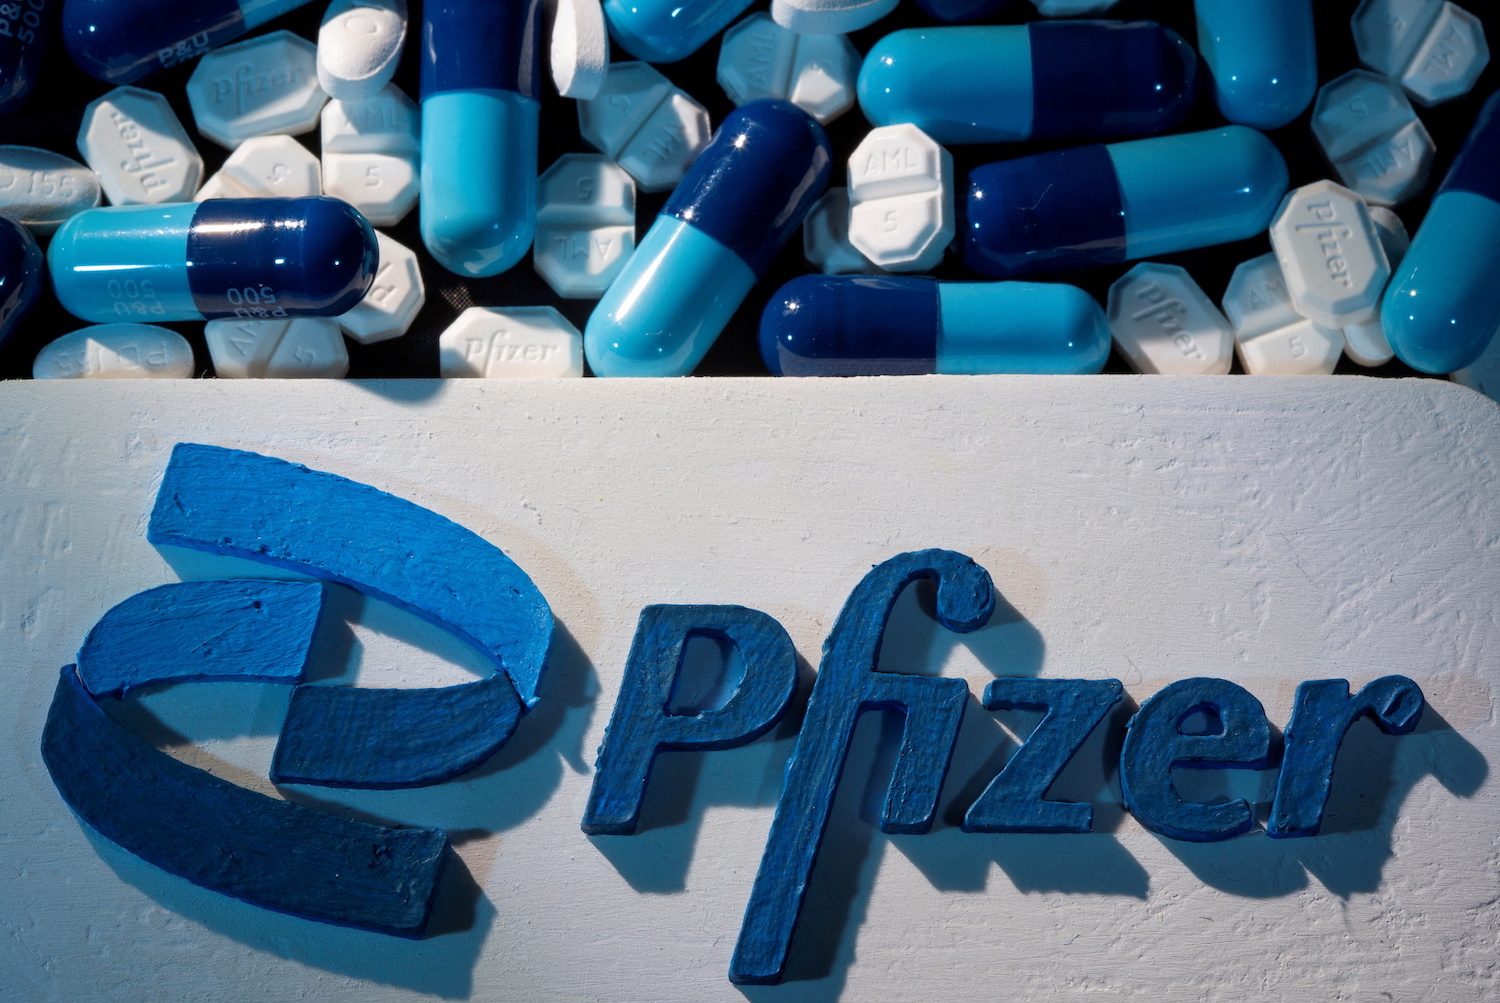 Pfizer to cut US sales staff as meetings with healthcare providers move to virtual